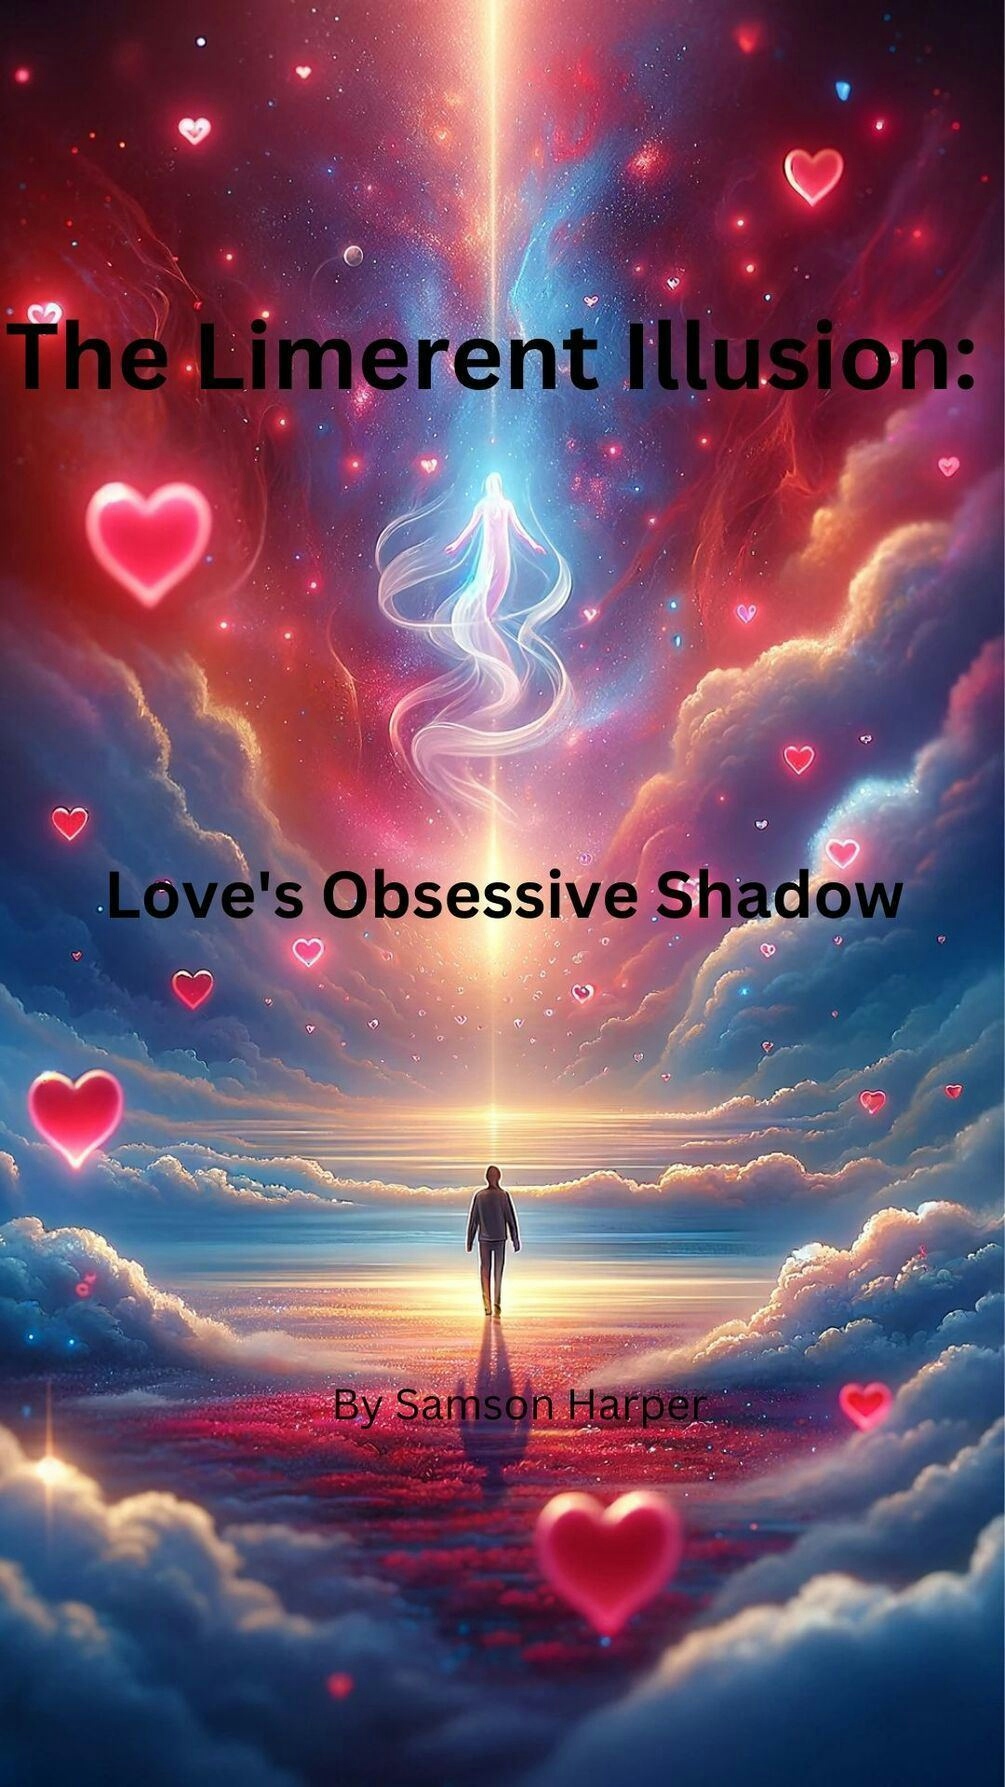 The Limerent Illusion: Love's Obsessive Shadow by Samson Harper